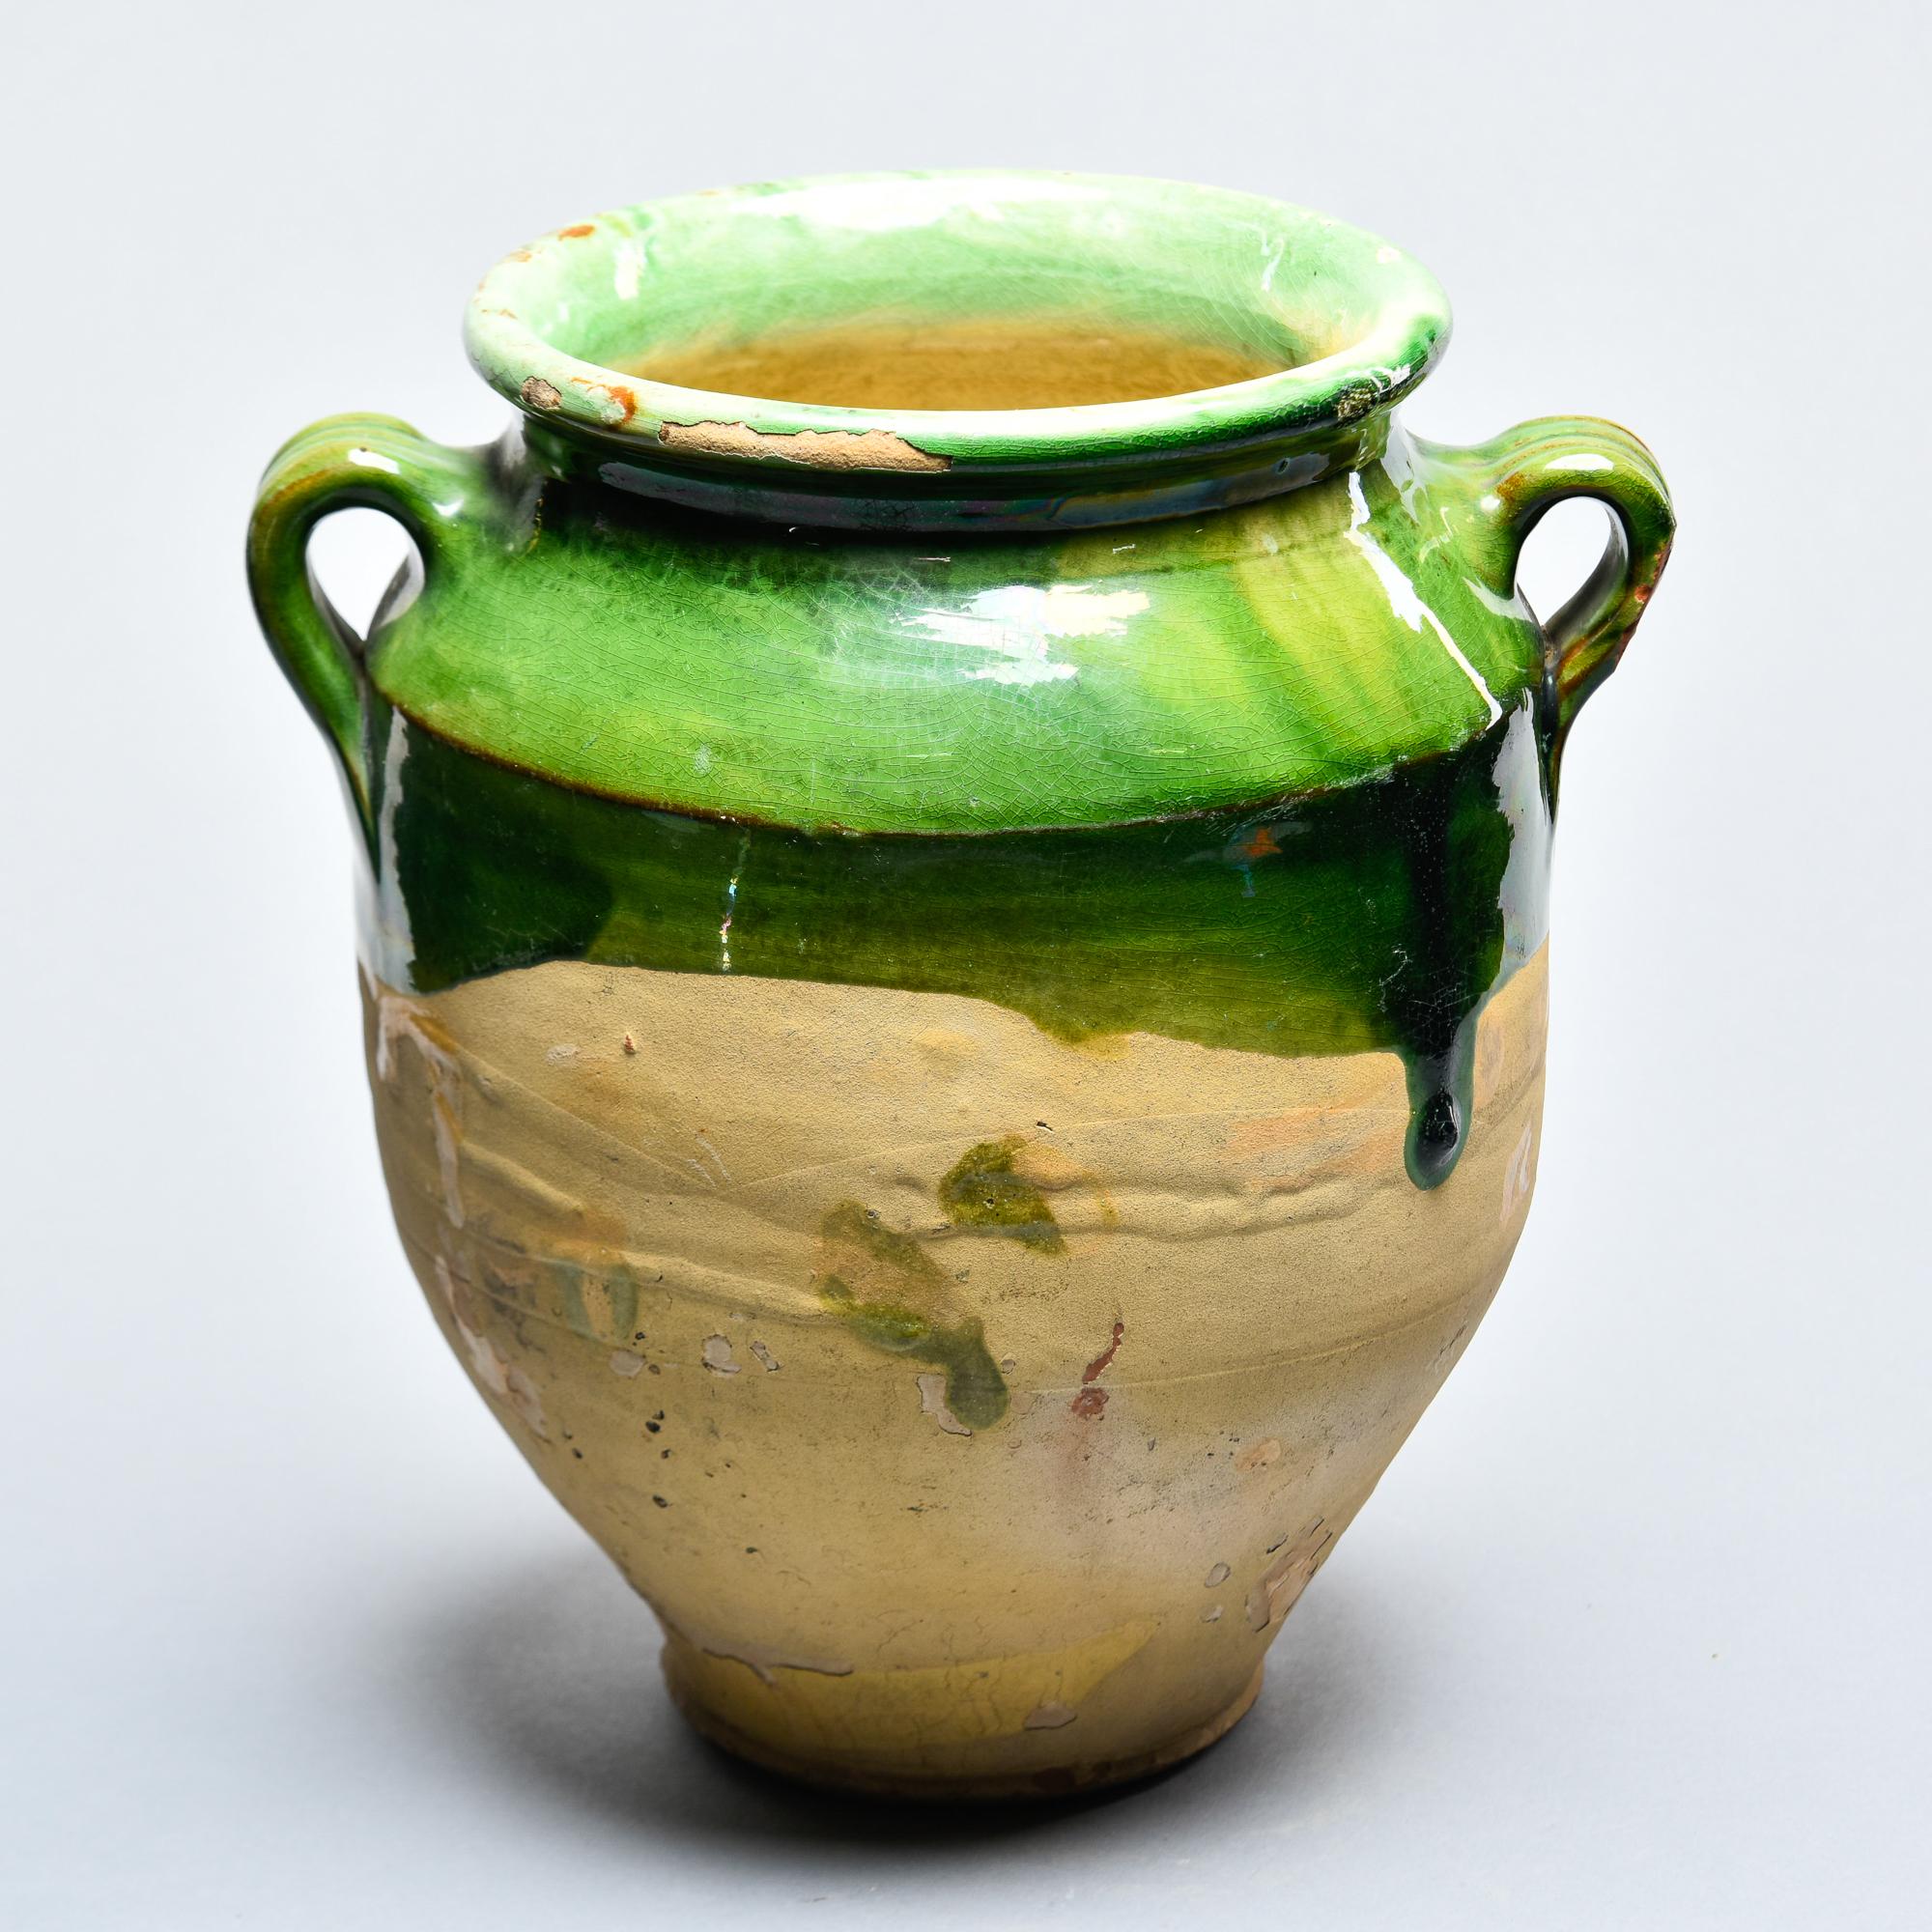 Found in France, this French confit jar dates from approximately 1915. This piece stands 11” high and has the traditional form with a wide vessel body and two handles on the sides with a green colored glaze on the outside top half and fully glazed